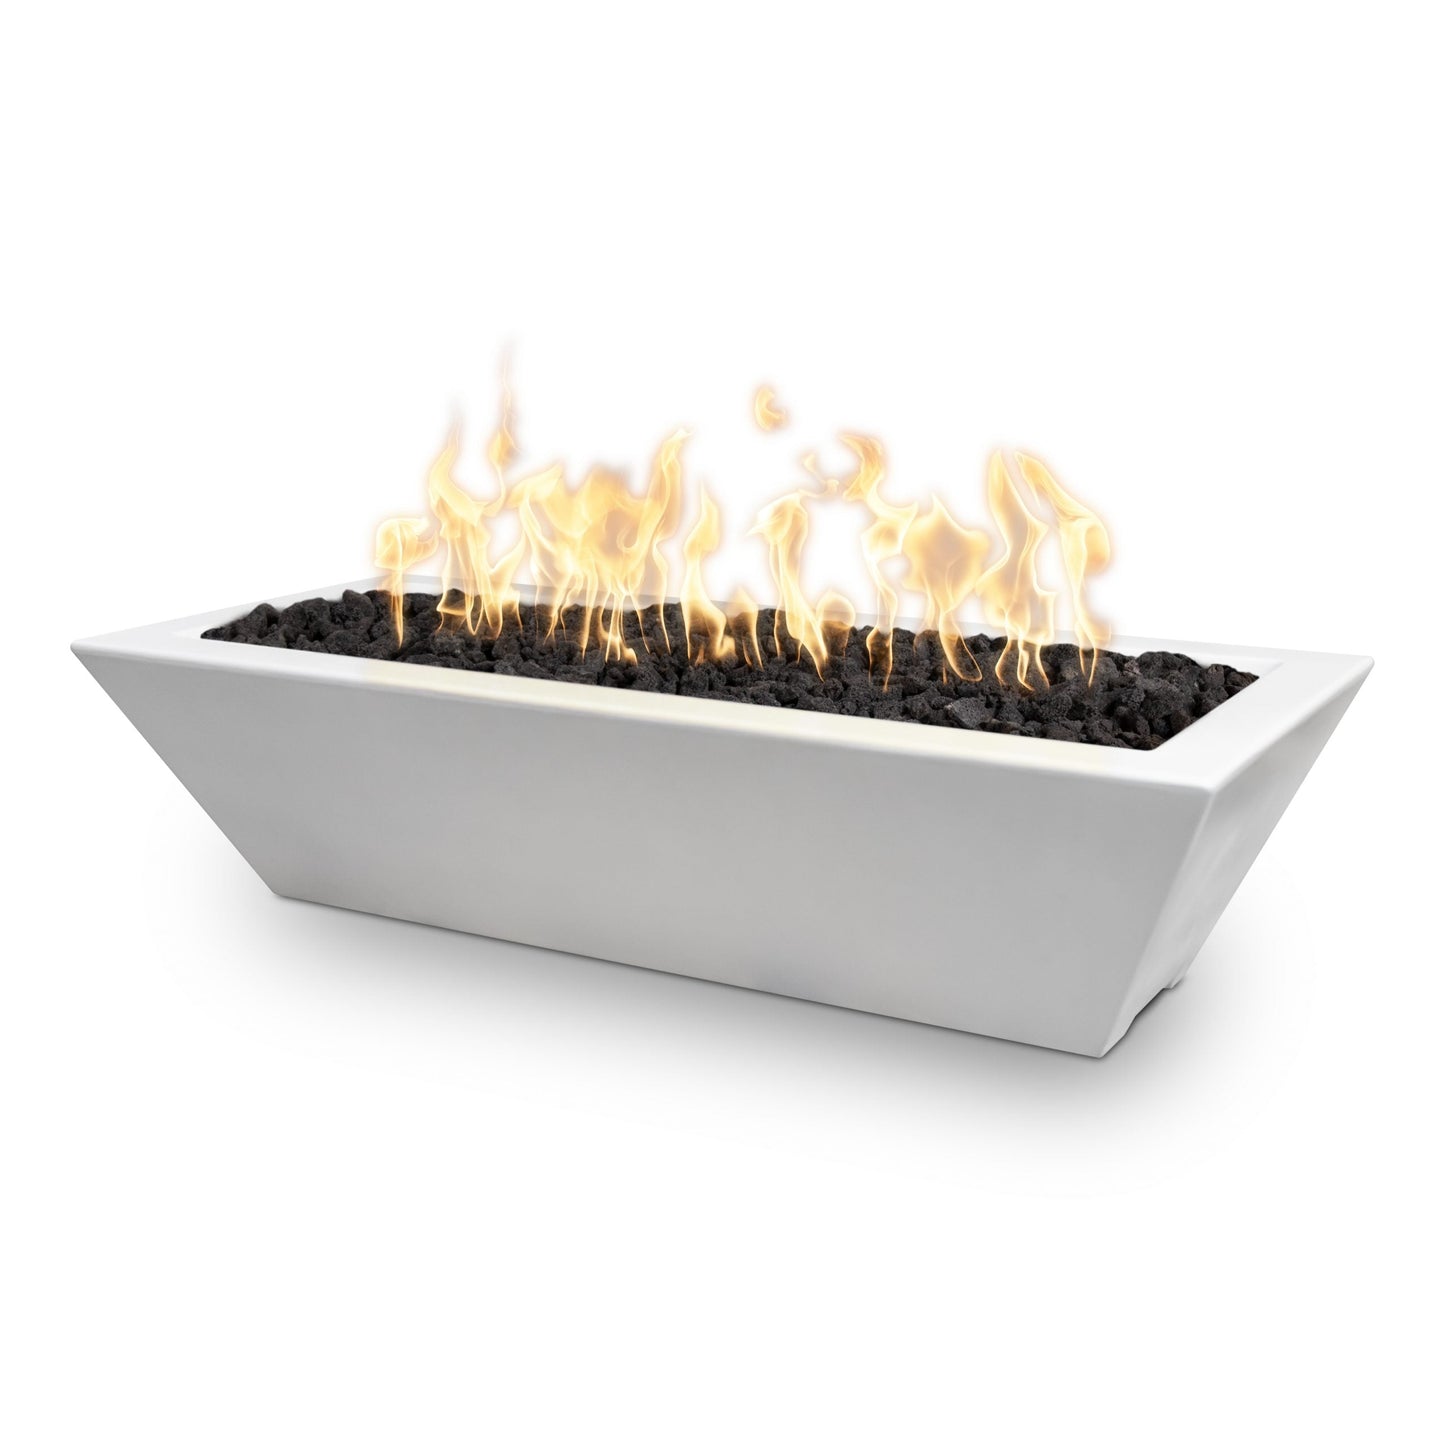 The Outdoor Plus Linear Maya 72" White GFRC Concrete Liquid Propane Fire Bowl with Match Lit Ignition